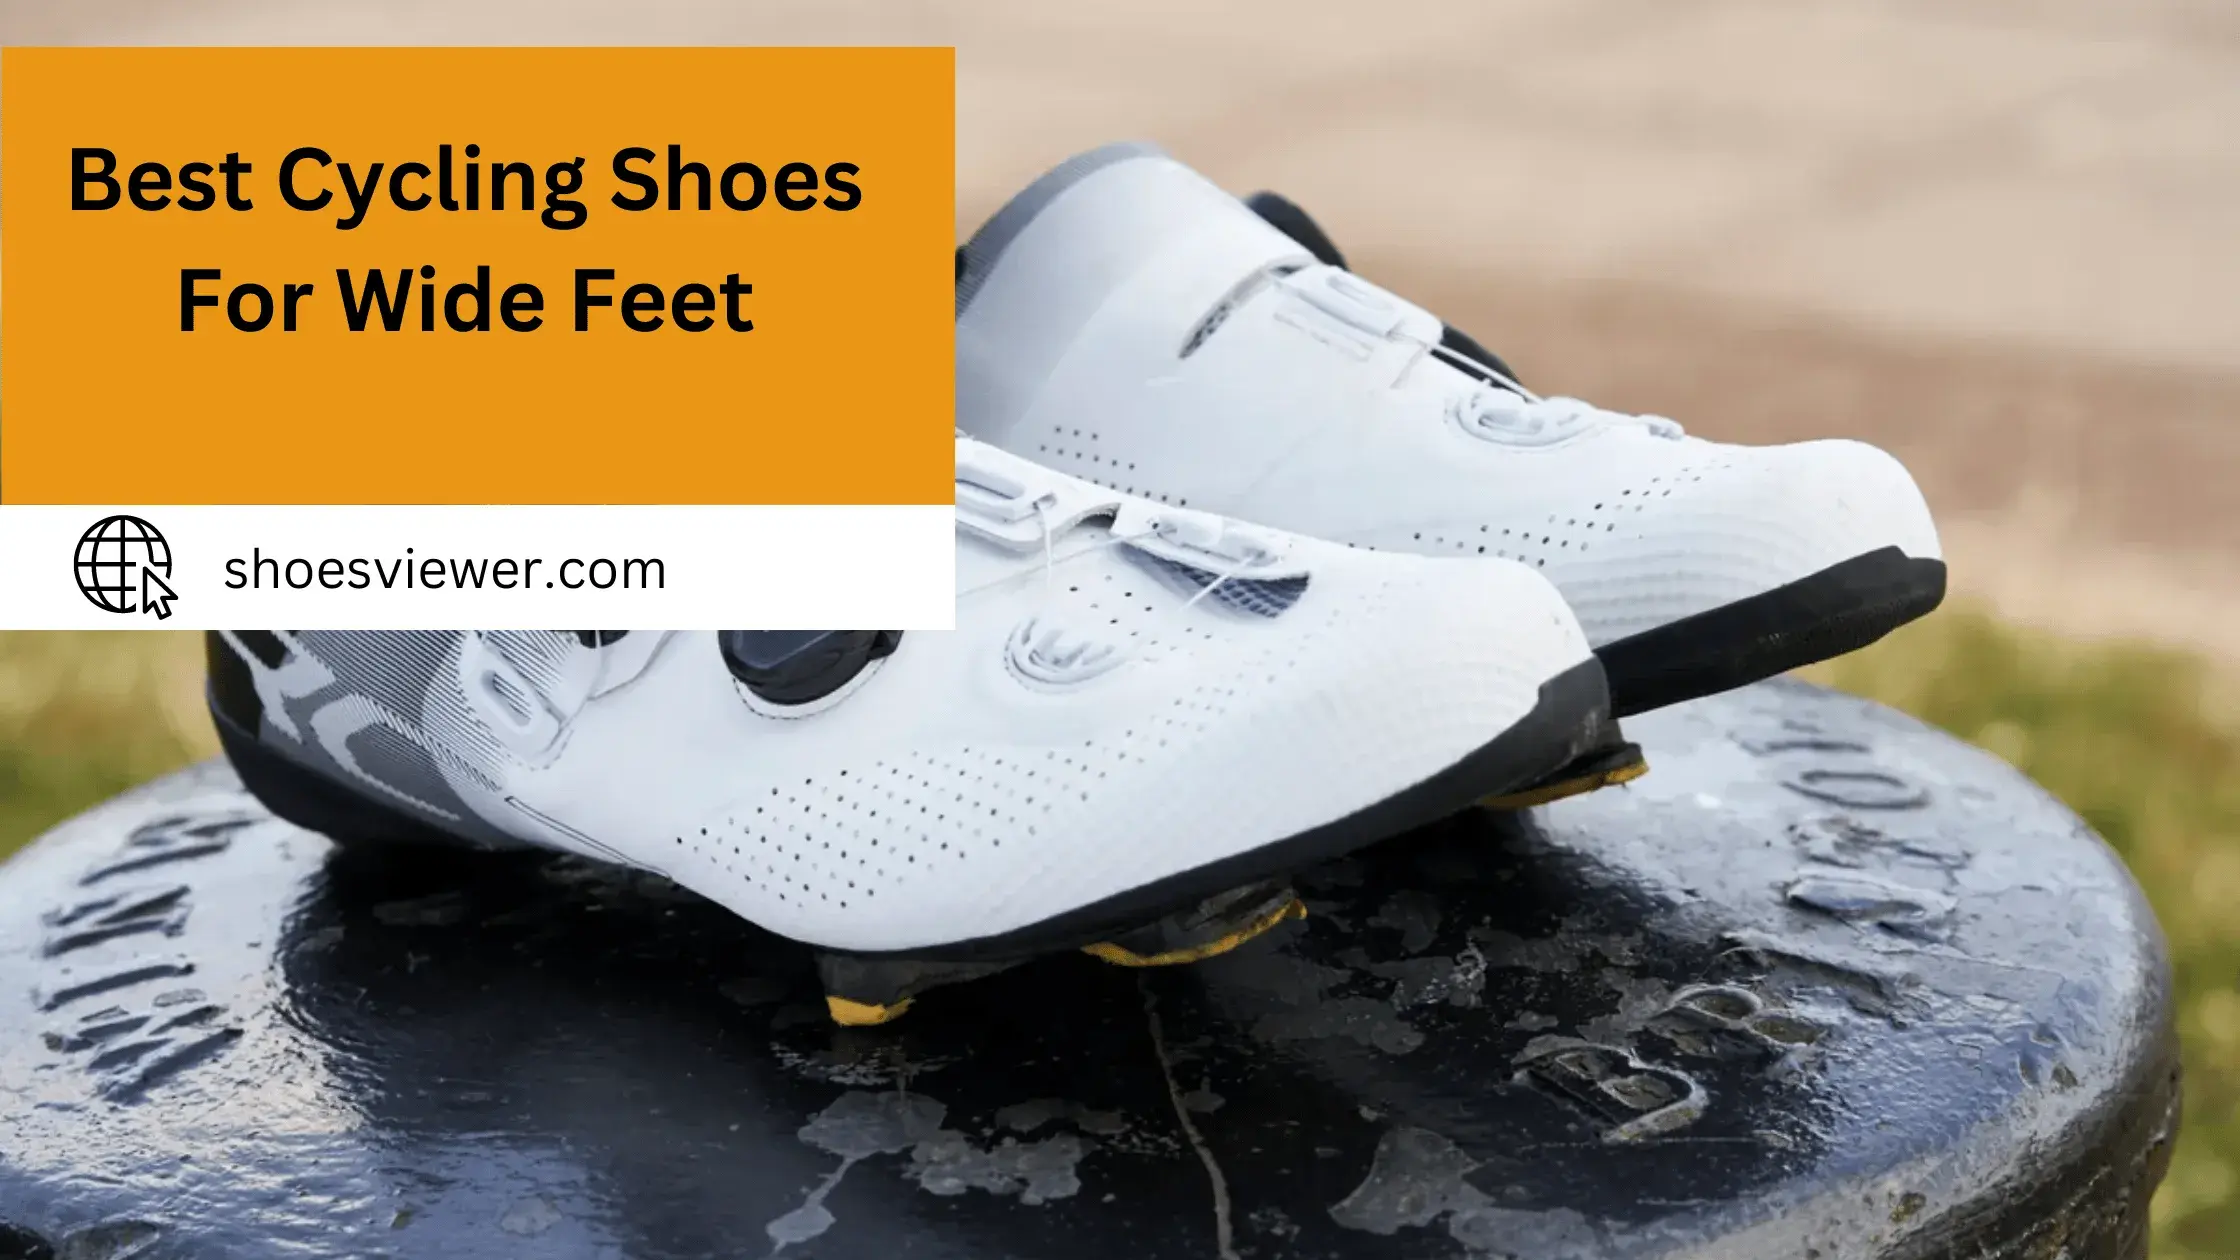 Best Cycling Shoes For Wide Feet - A Comprehensive Guide